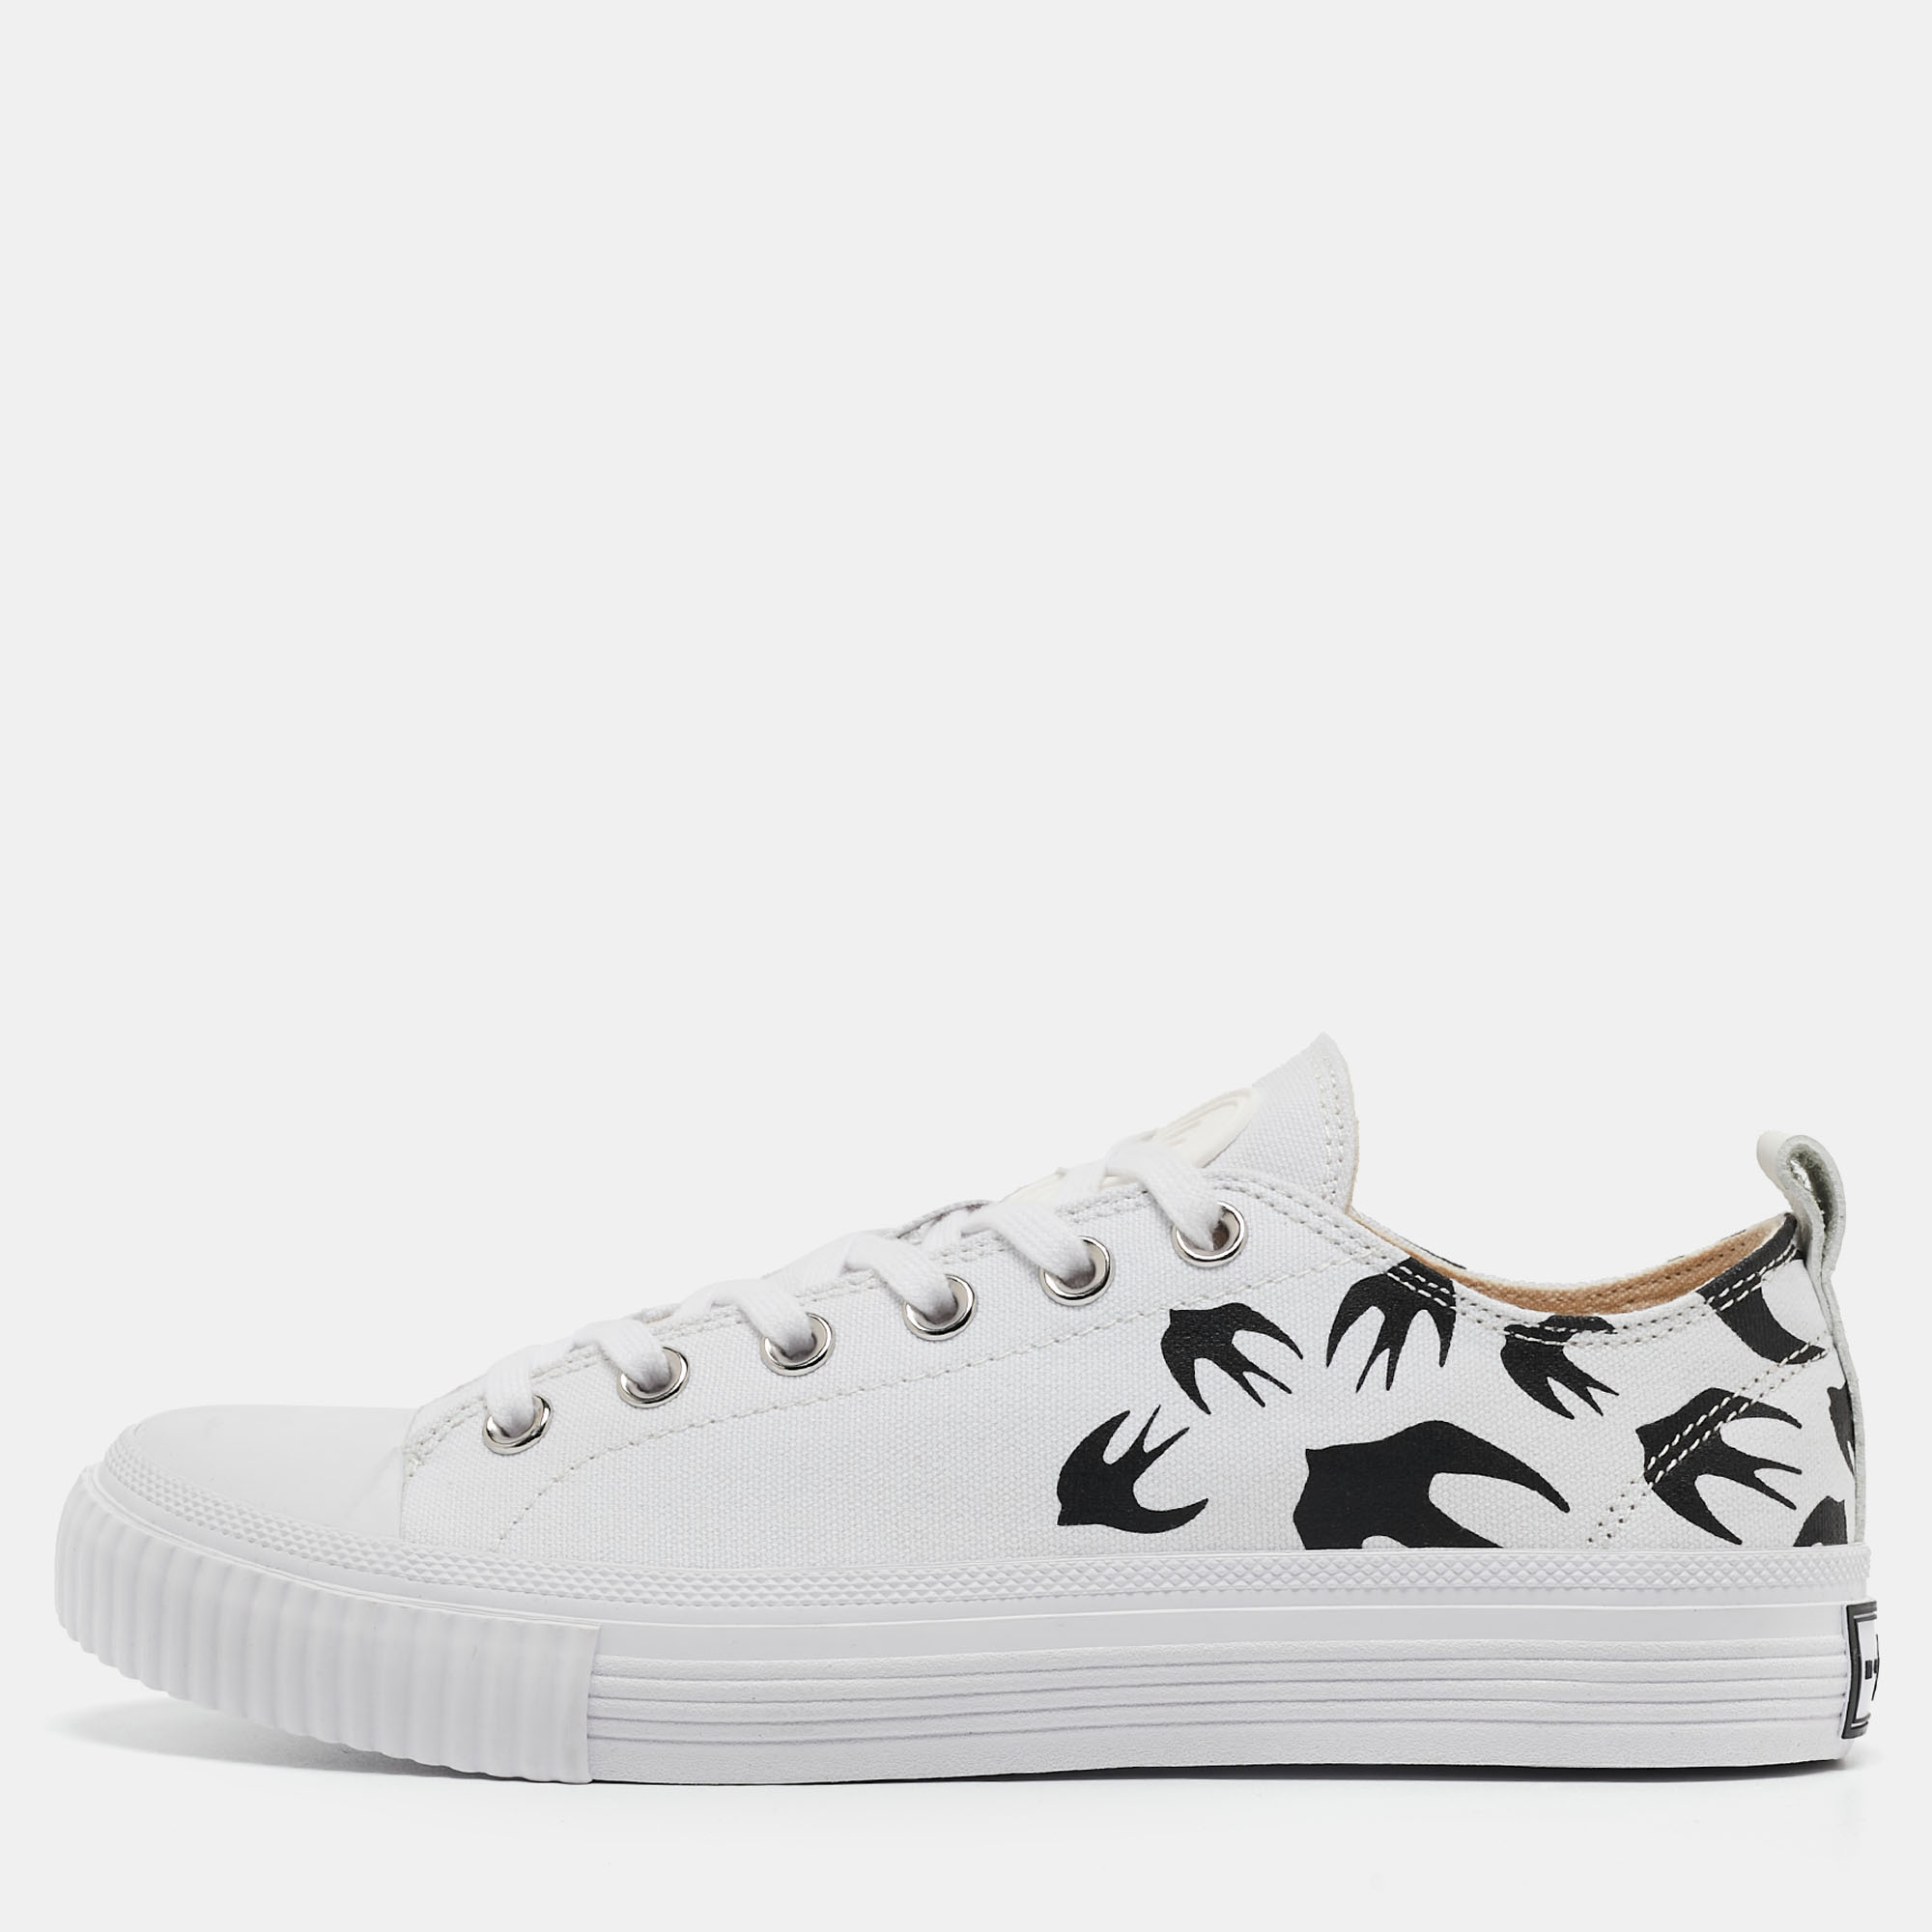 Pre-owned Mcq By Alexander Mcqueen White/black Canvas Shallow Swarm Trainers Size 40